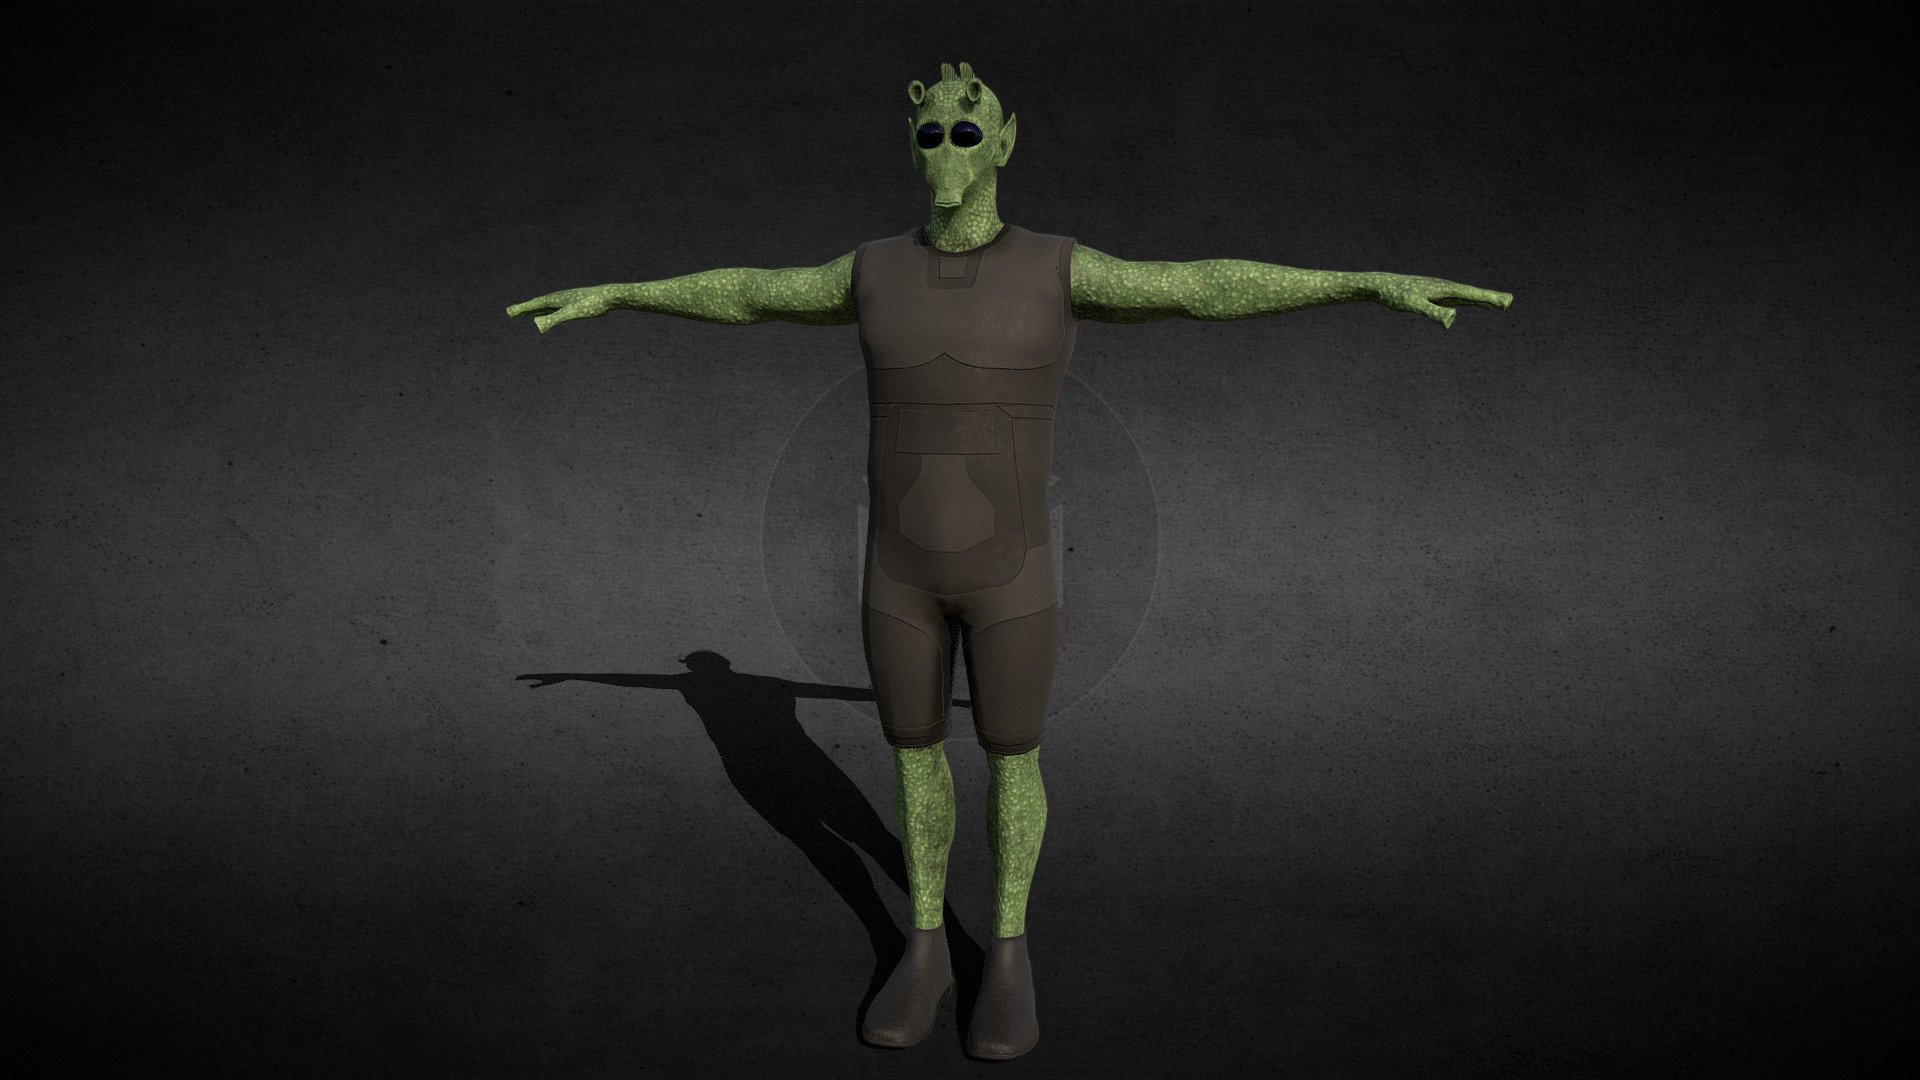 Rodian Basemesh i made for my game. You can use it for anything you want as long as you credit me 3d model